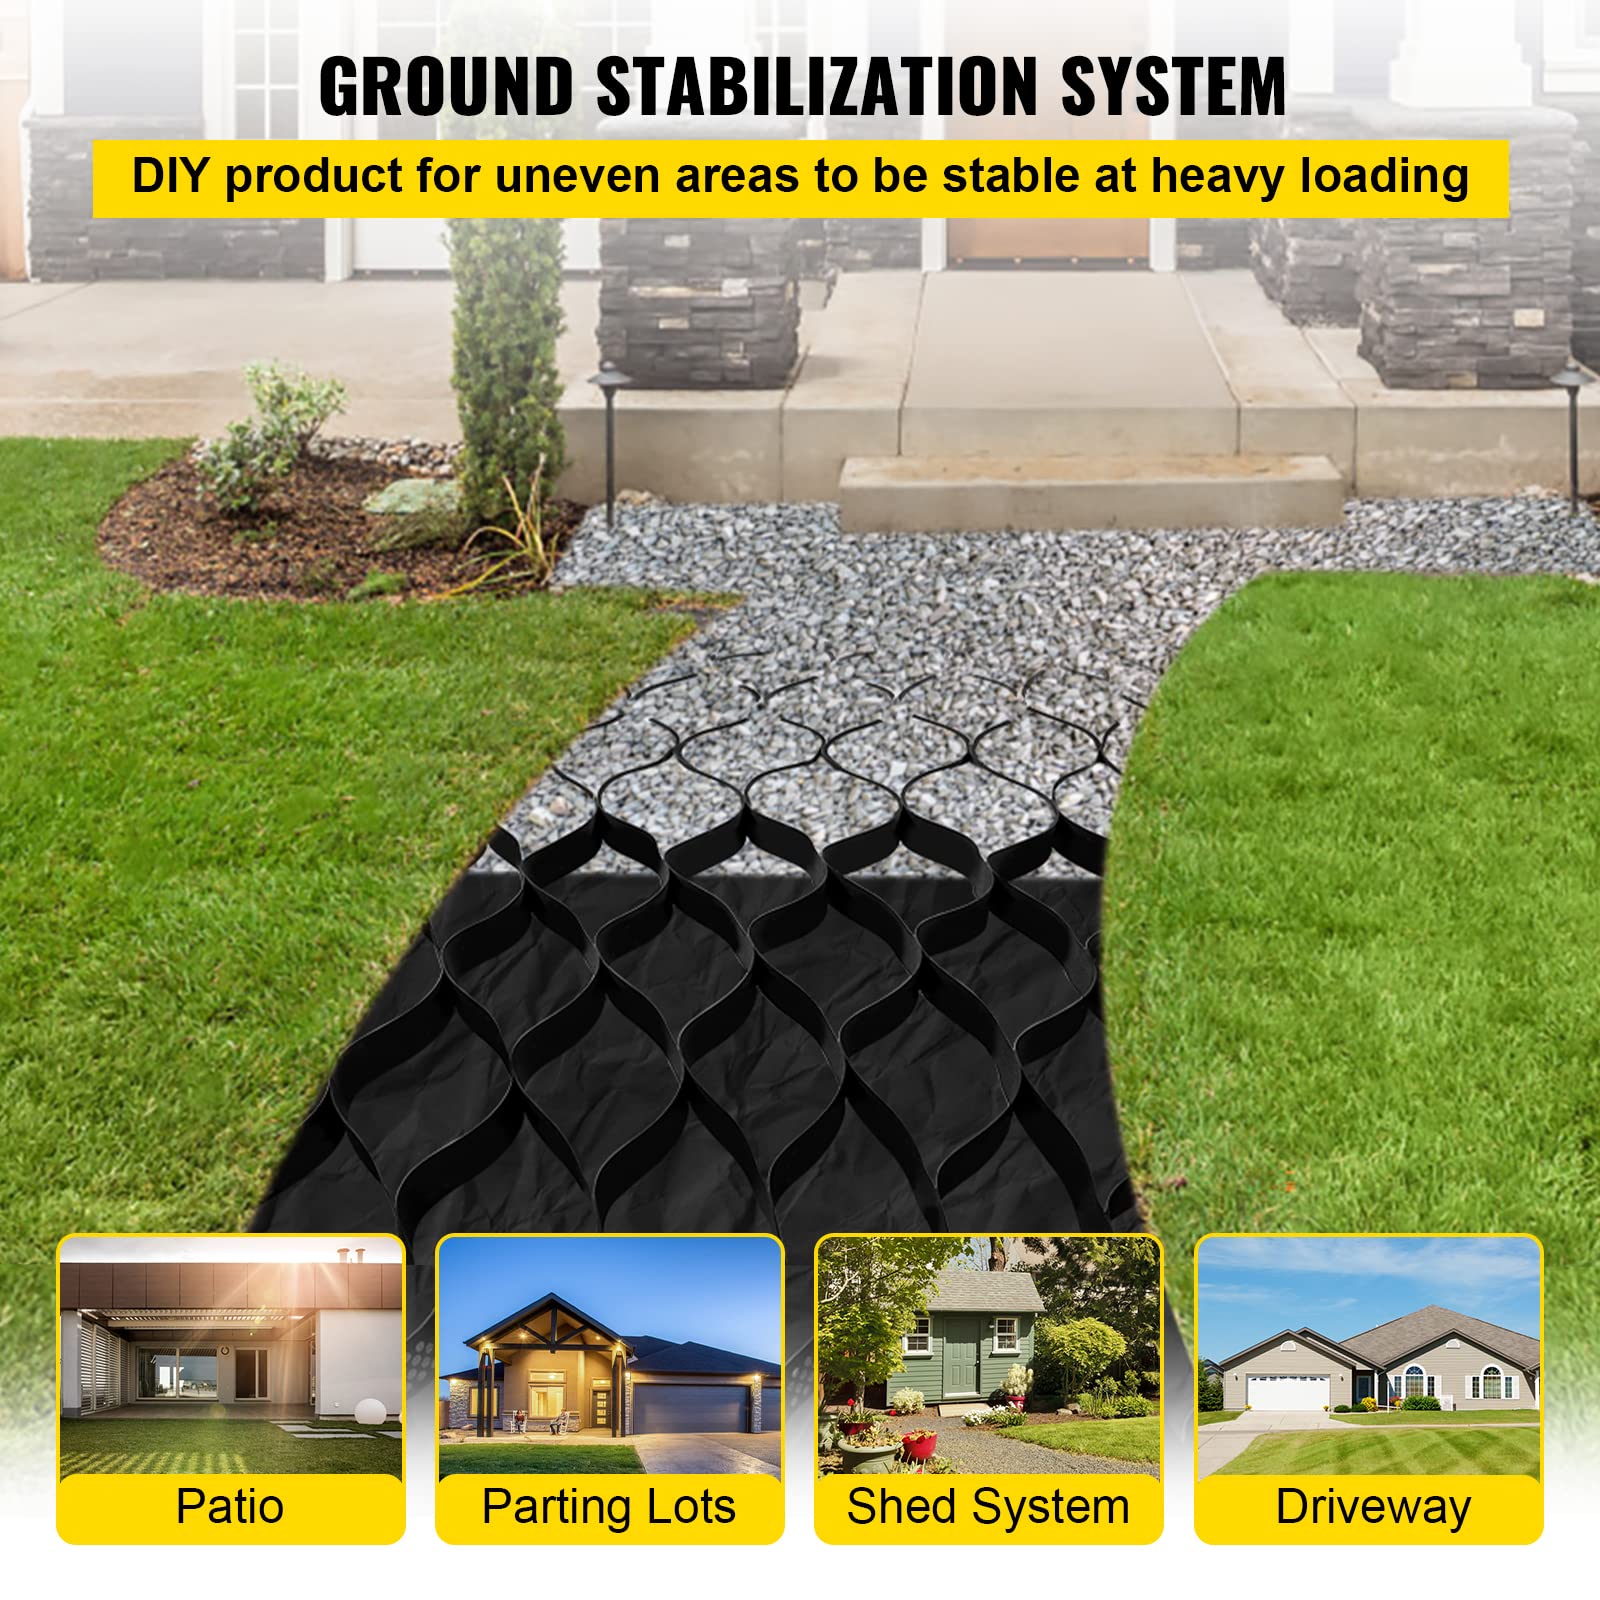 VEVOR Ground Grid 27 ft x 4 ft, 1885 lbs per Sq Ft Load Geo Grid, 2" Depth Permeable Stabilization System for DIY Patio, Walkway, Shed Base, Light Vehicle Driveway, Parking Lot, Grass, and Gravel